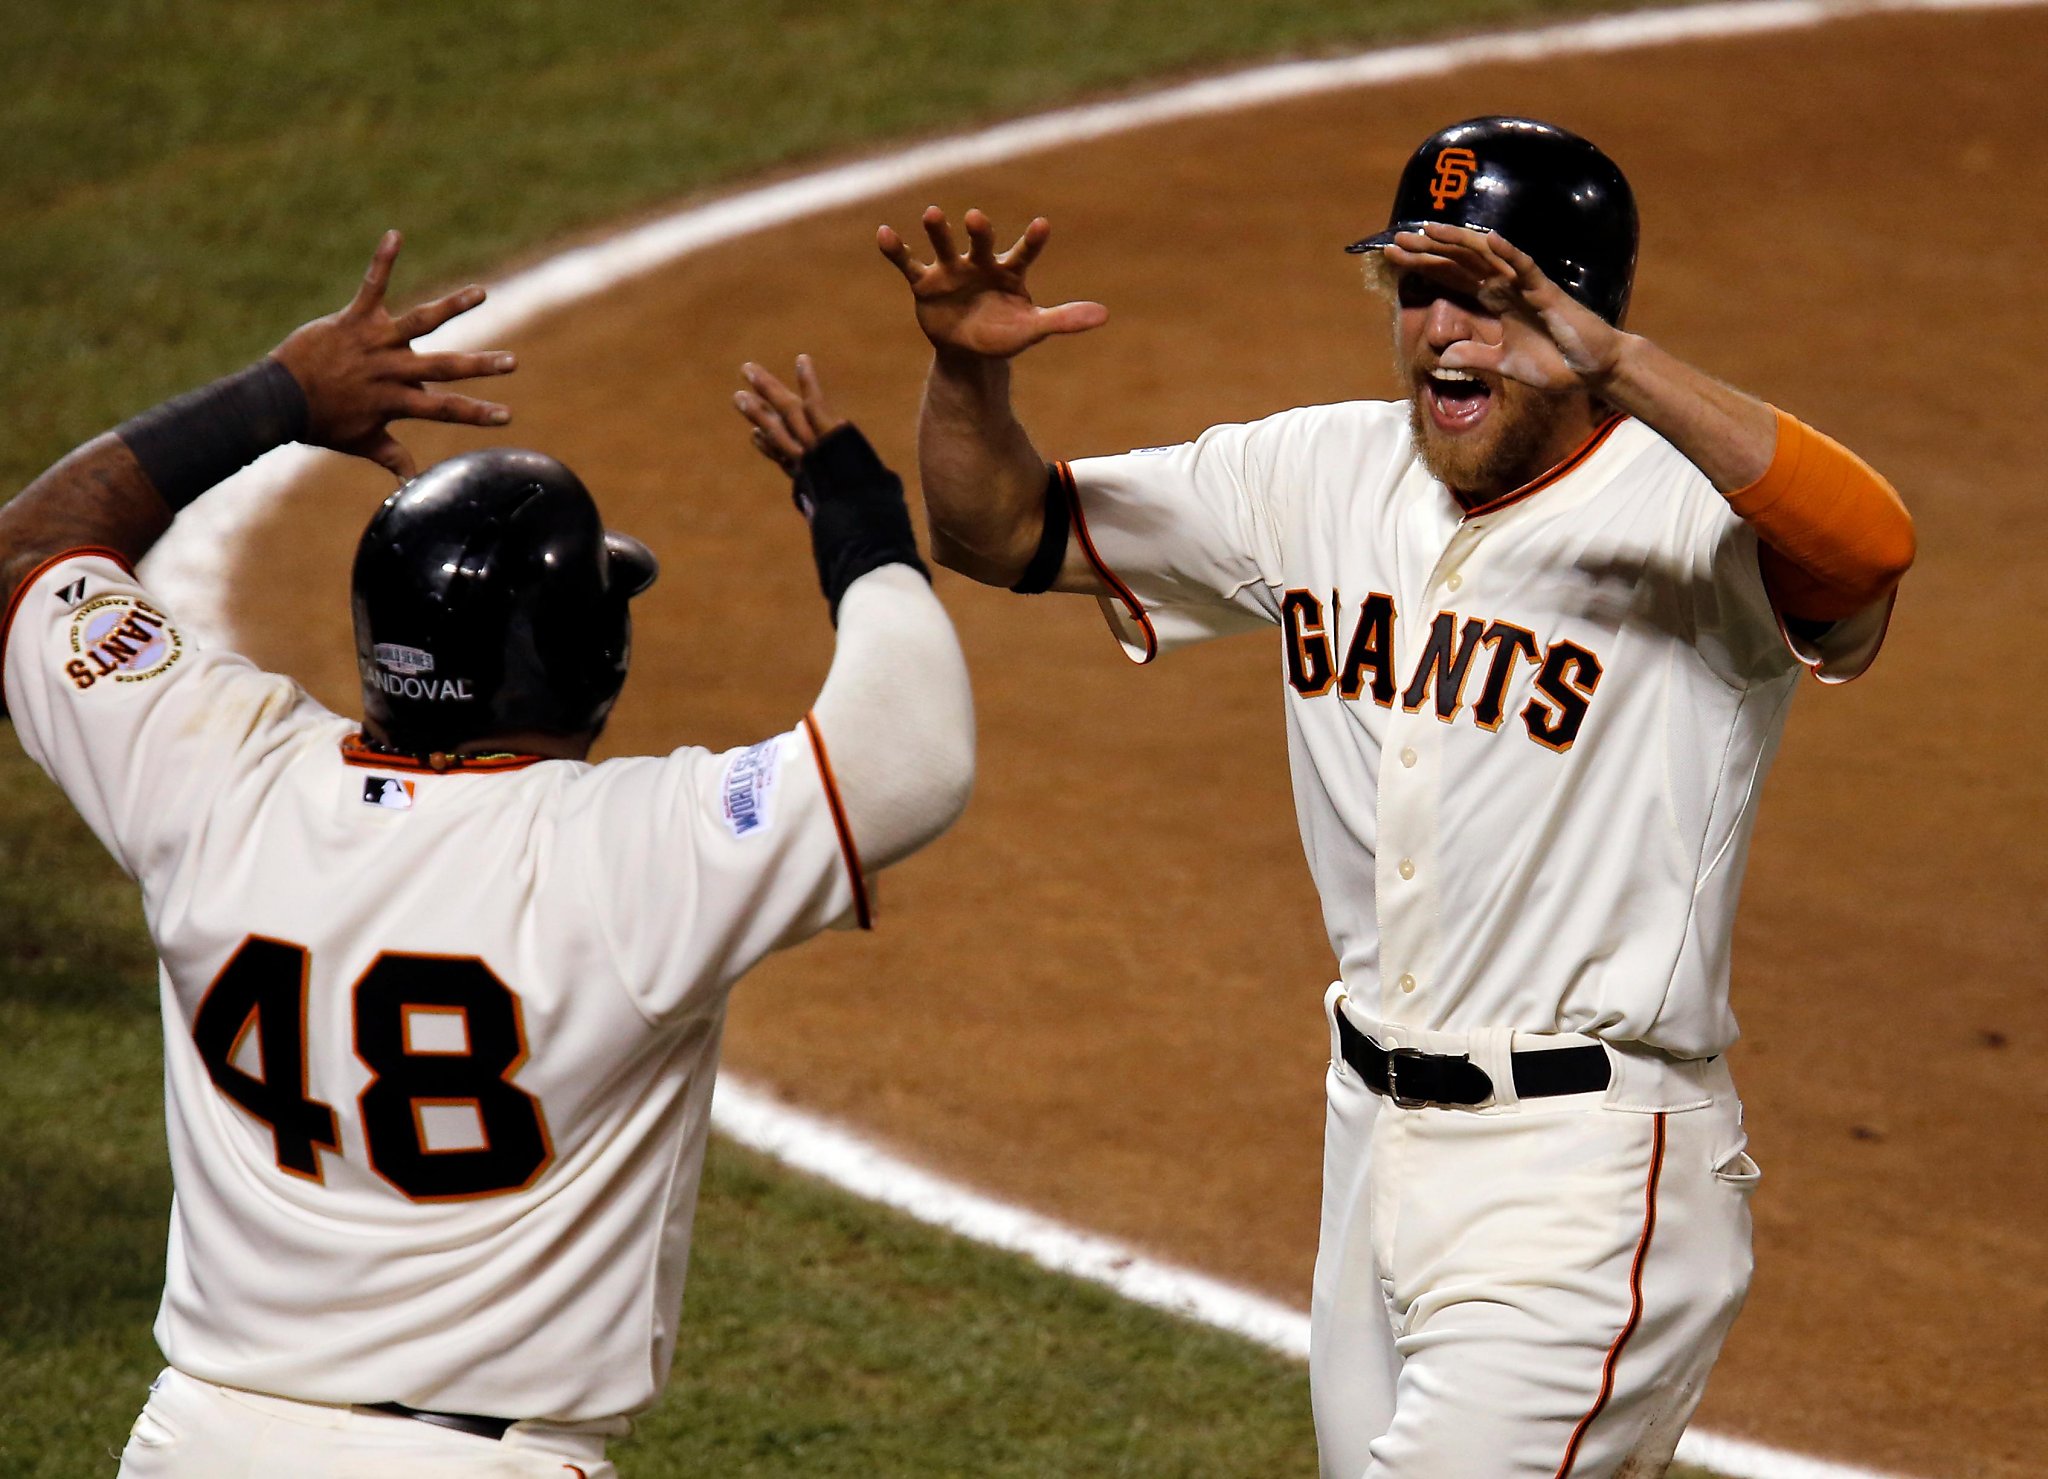 San Francisco Giants news: Pablo Sandoval re-signs - McCovey Chronicles